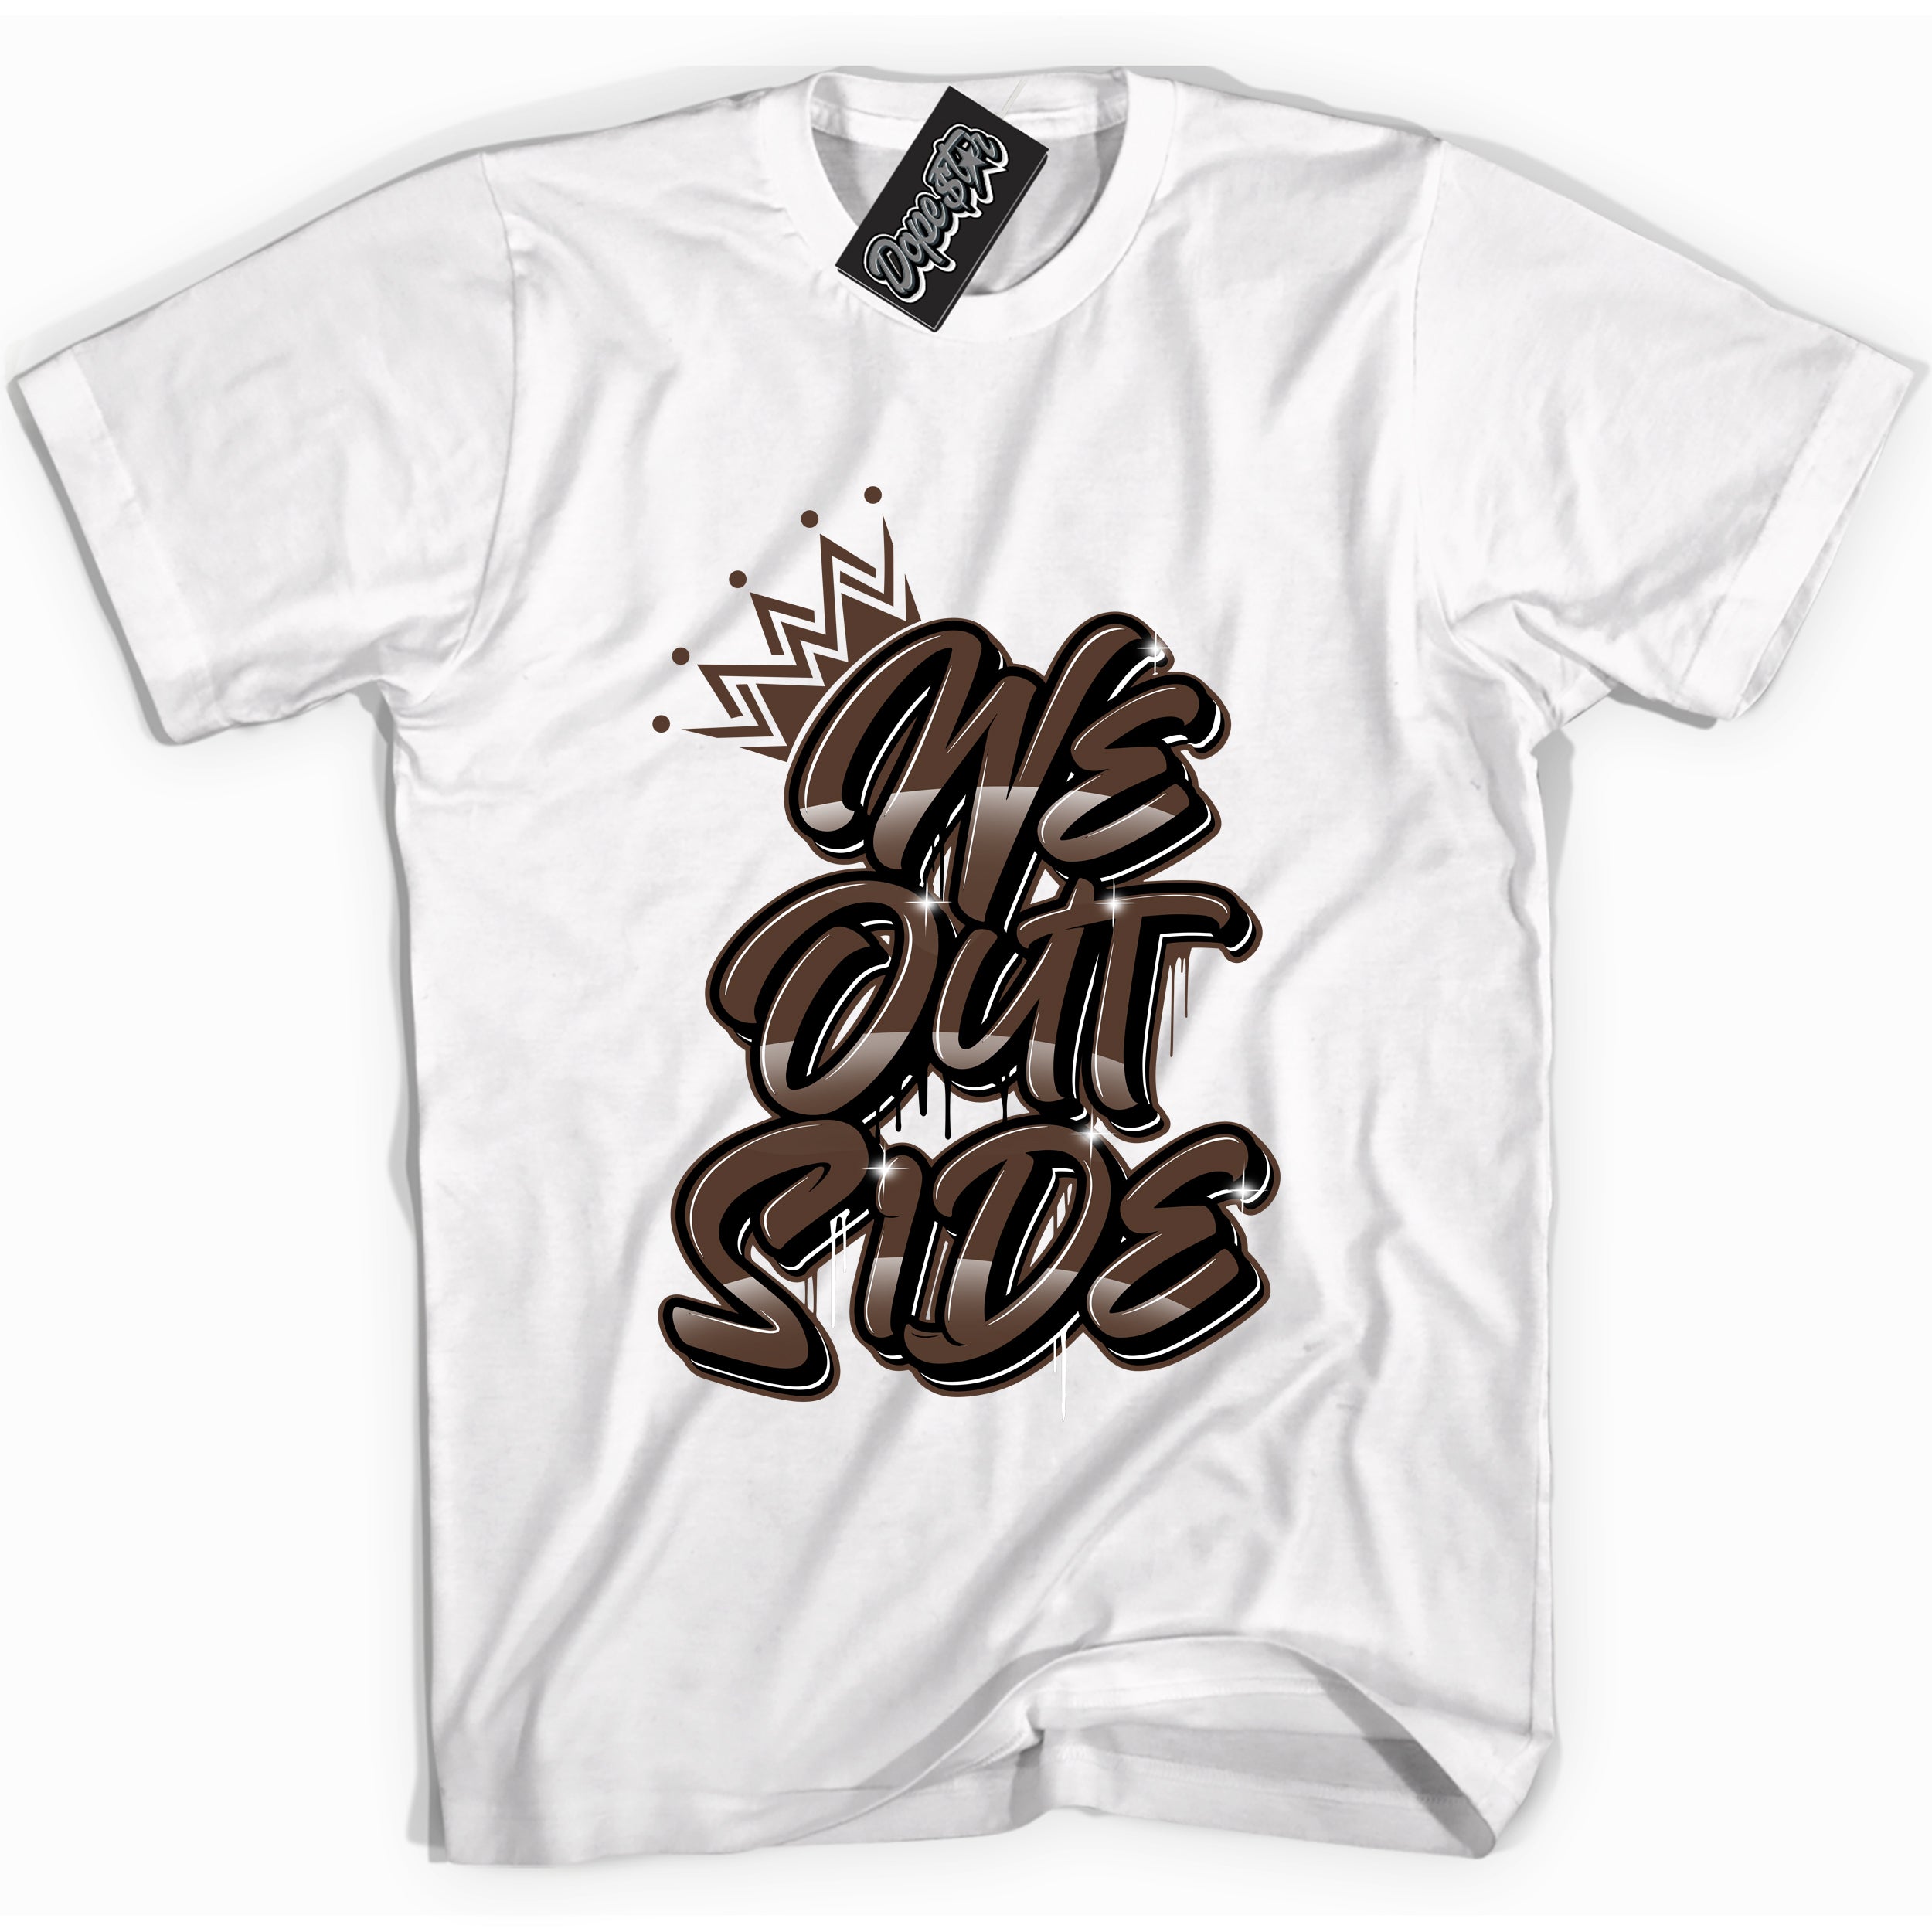 Cool White graphic tee with “ We Outside ” design, that perfectly matches Palomino 1s sneakers 